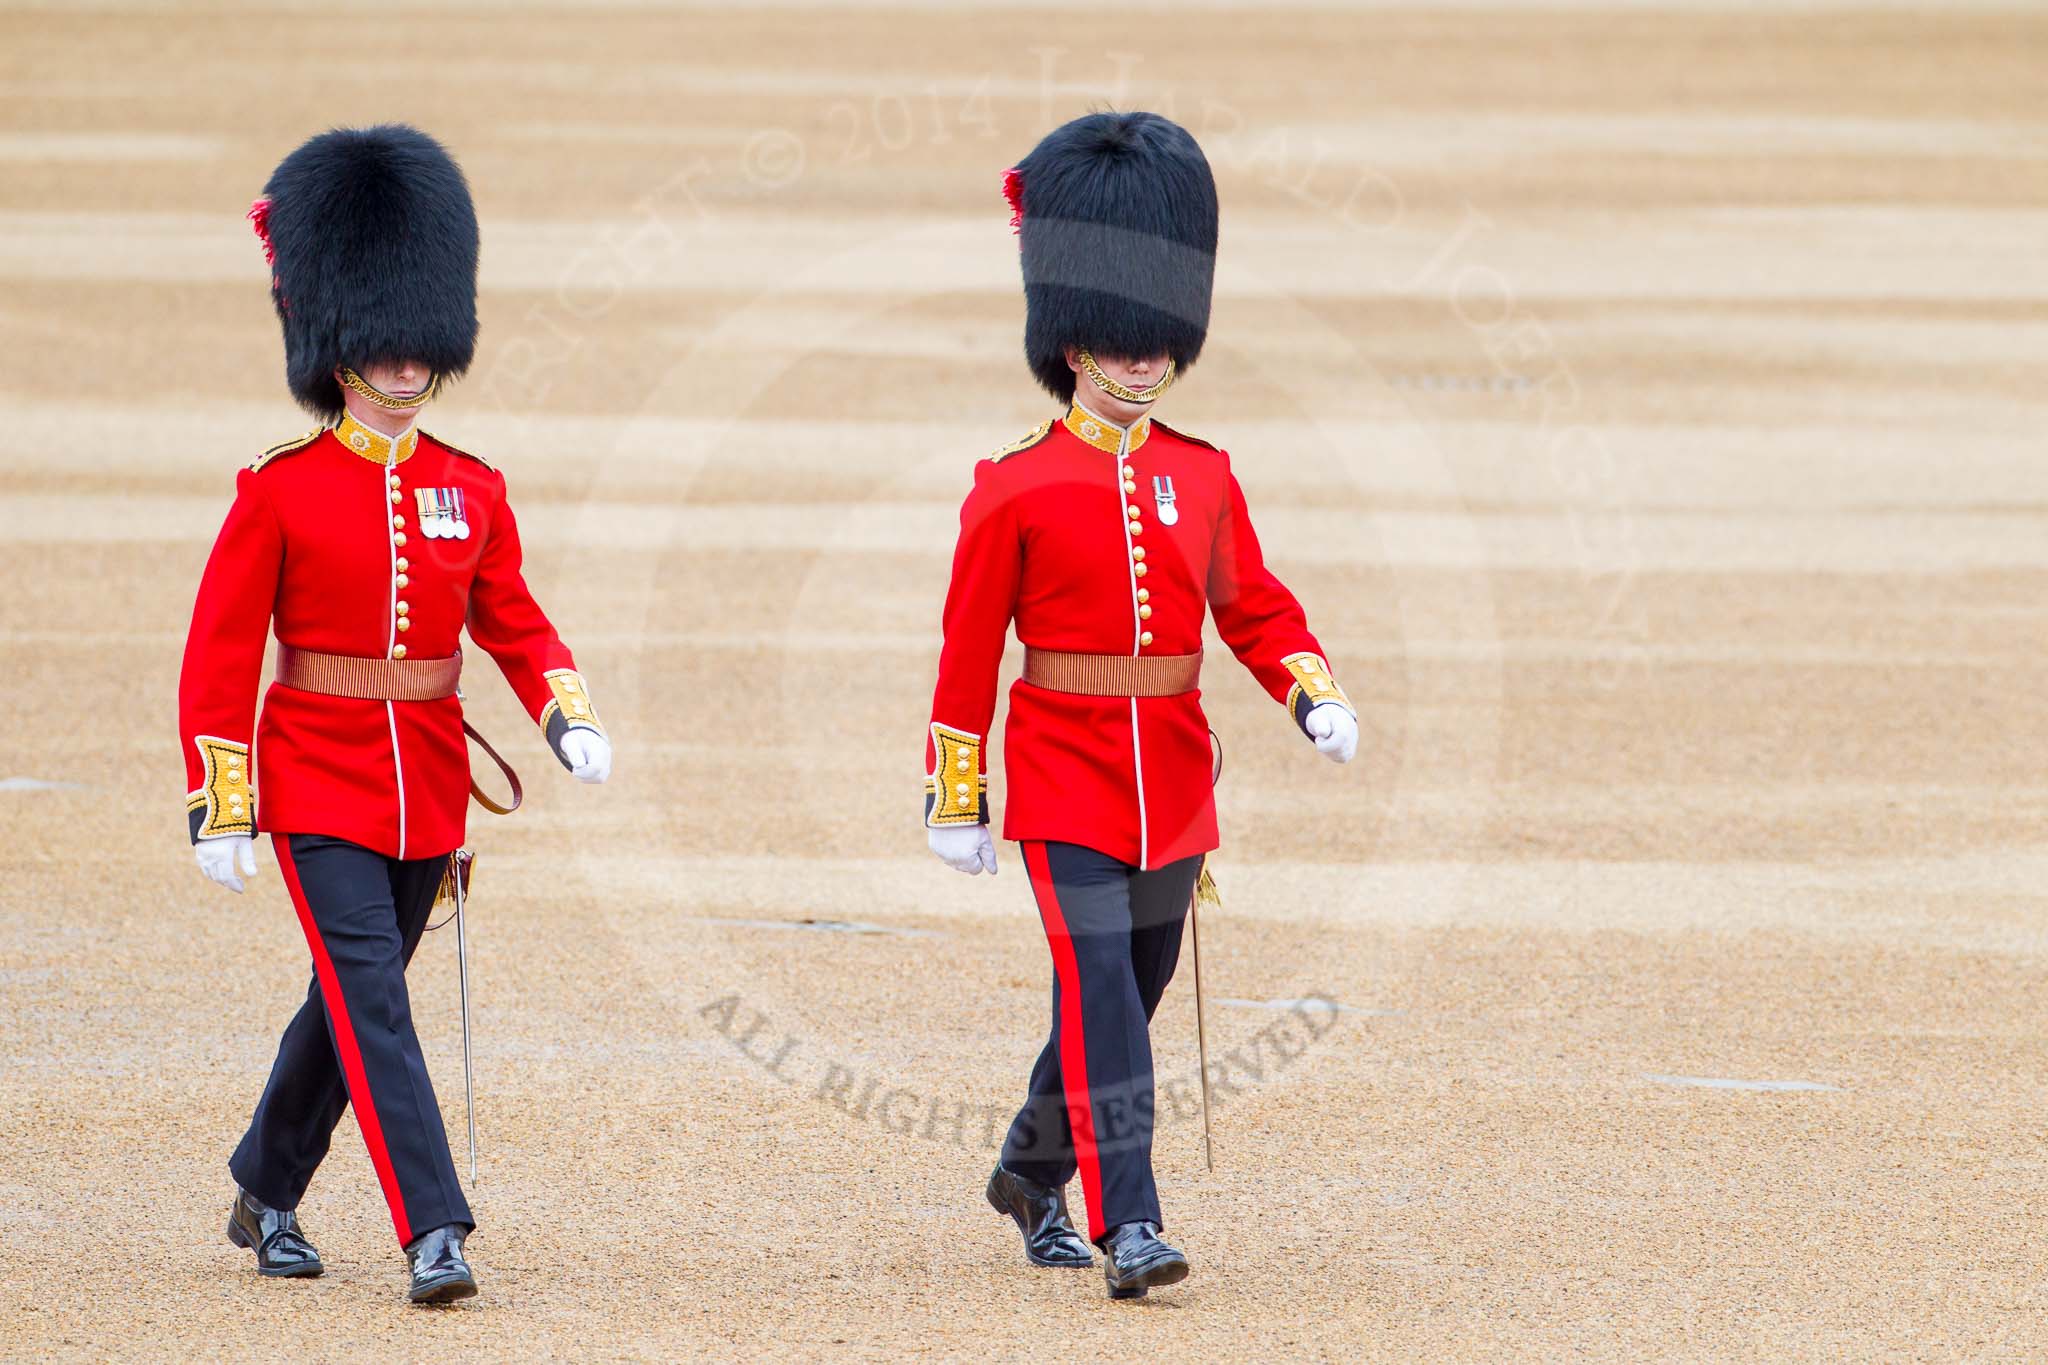 Trooping the Colour 2014.
Horse Guards Parade, Westminster,
London SW1A,

United Kingdom,
on 14 June 2014 at 09:39, image #33